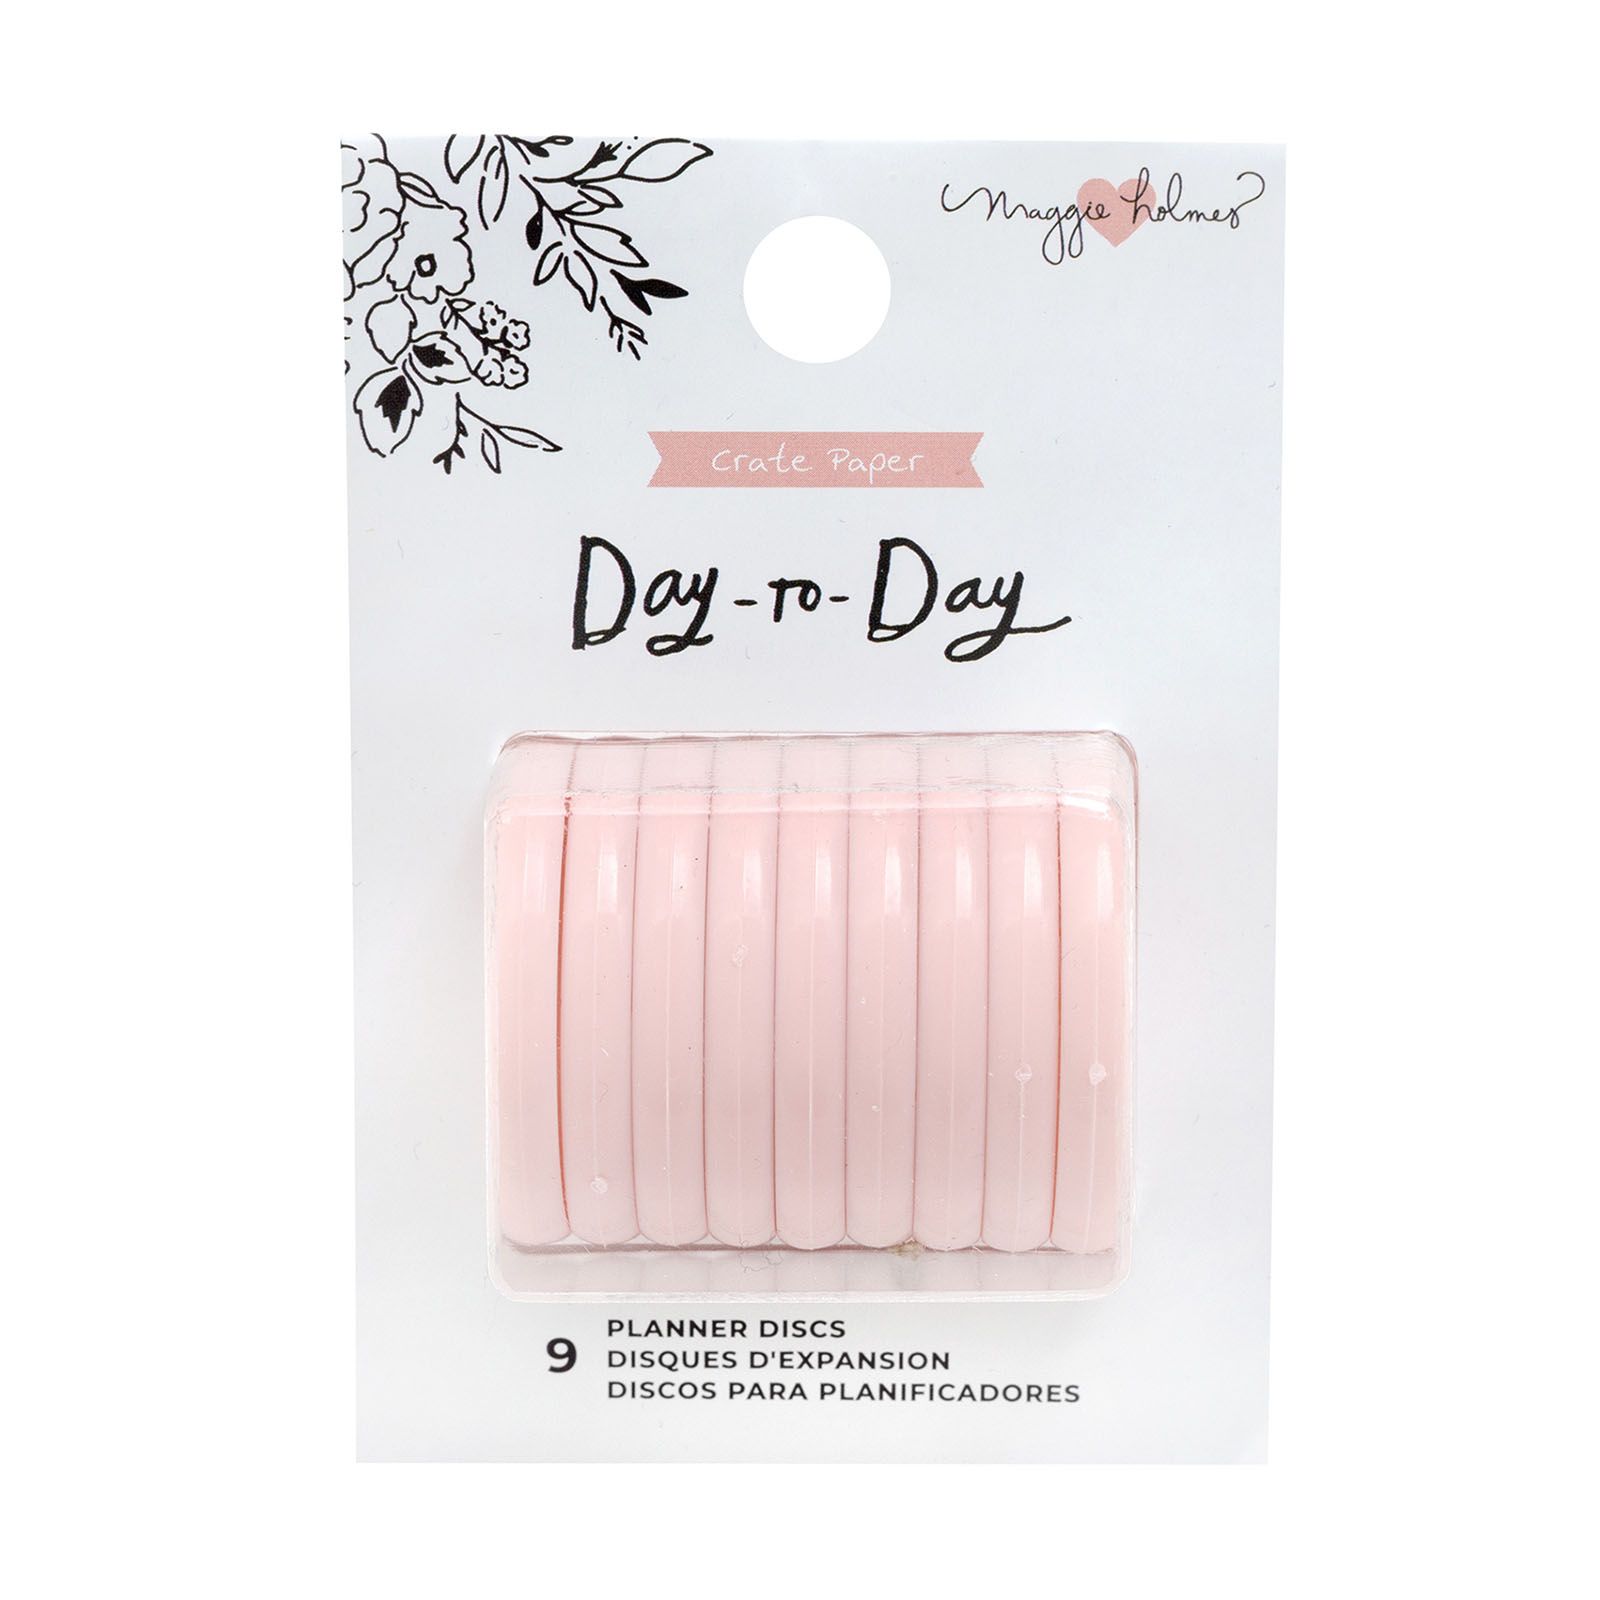 Crate Paper • Day-to-Day planner discs medium Blush